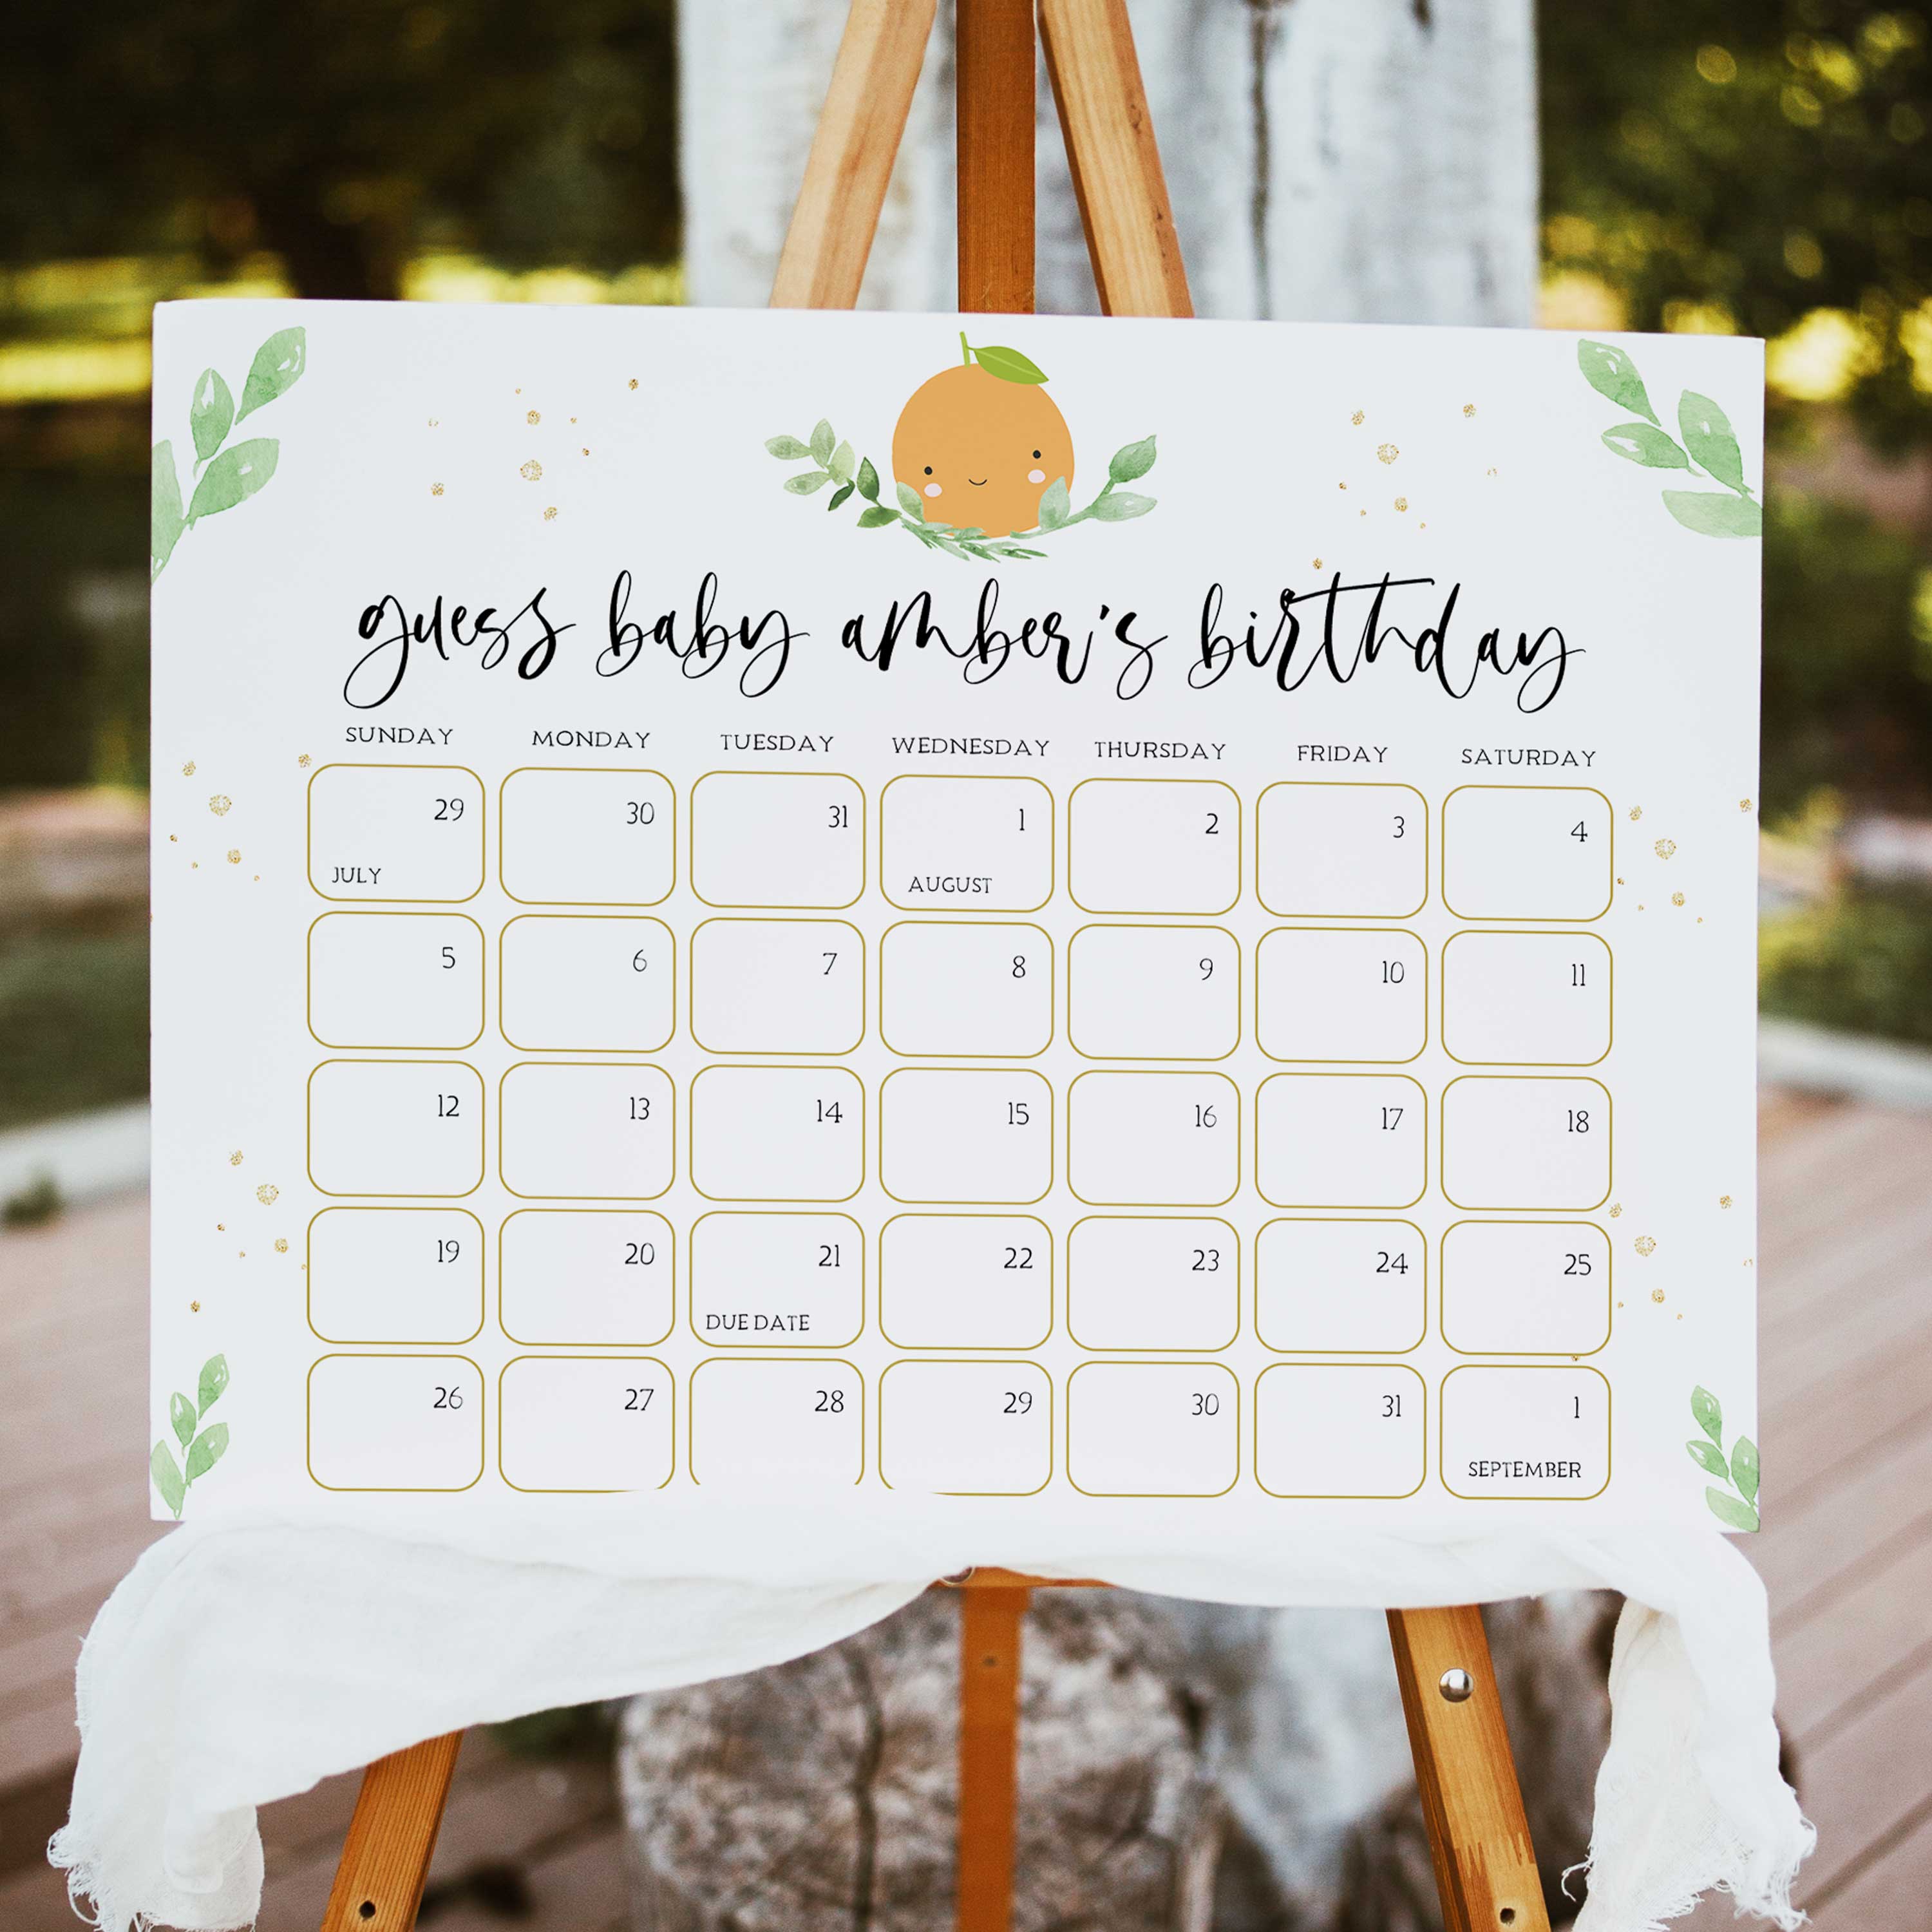 baby birthday predictions game, baby birthday game,  Printable baby shower games, little cutie baby games, baby shower games, fun baby shower ideas, top baby shower ideas, little cutie baby shower, baby shower games, fun little cutie baby shower ideas